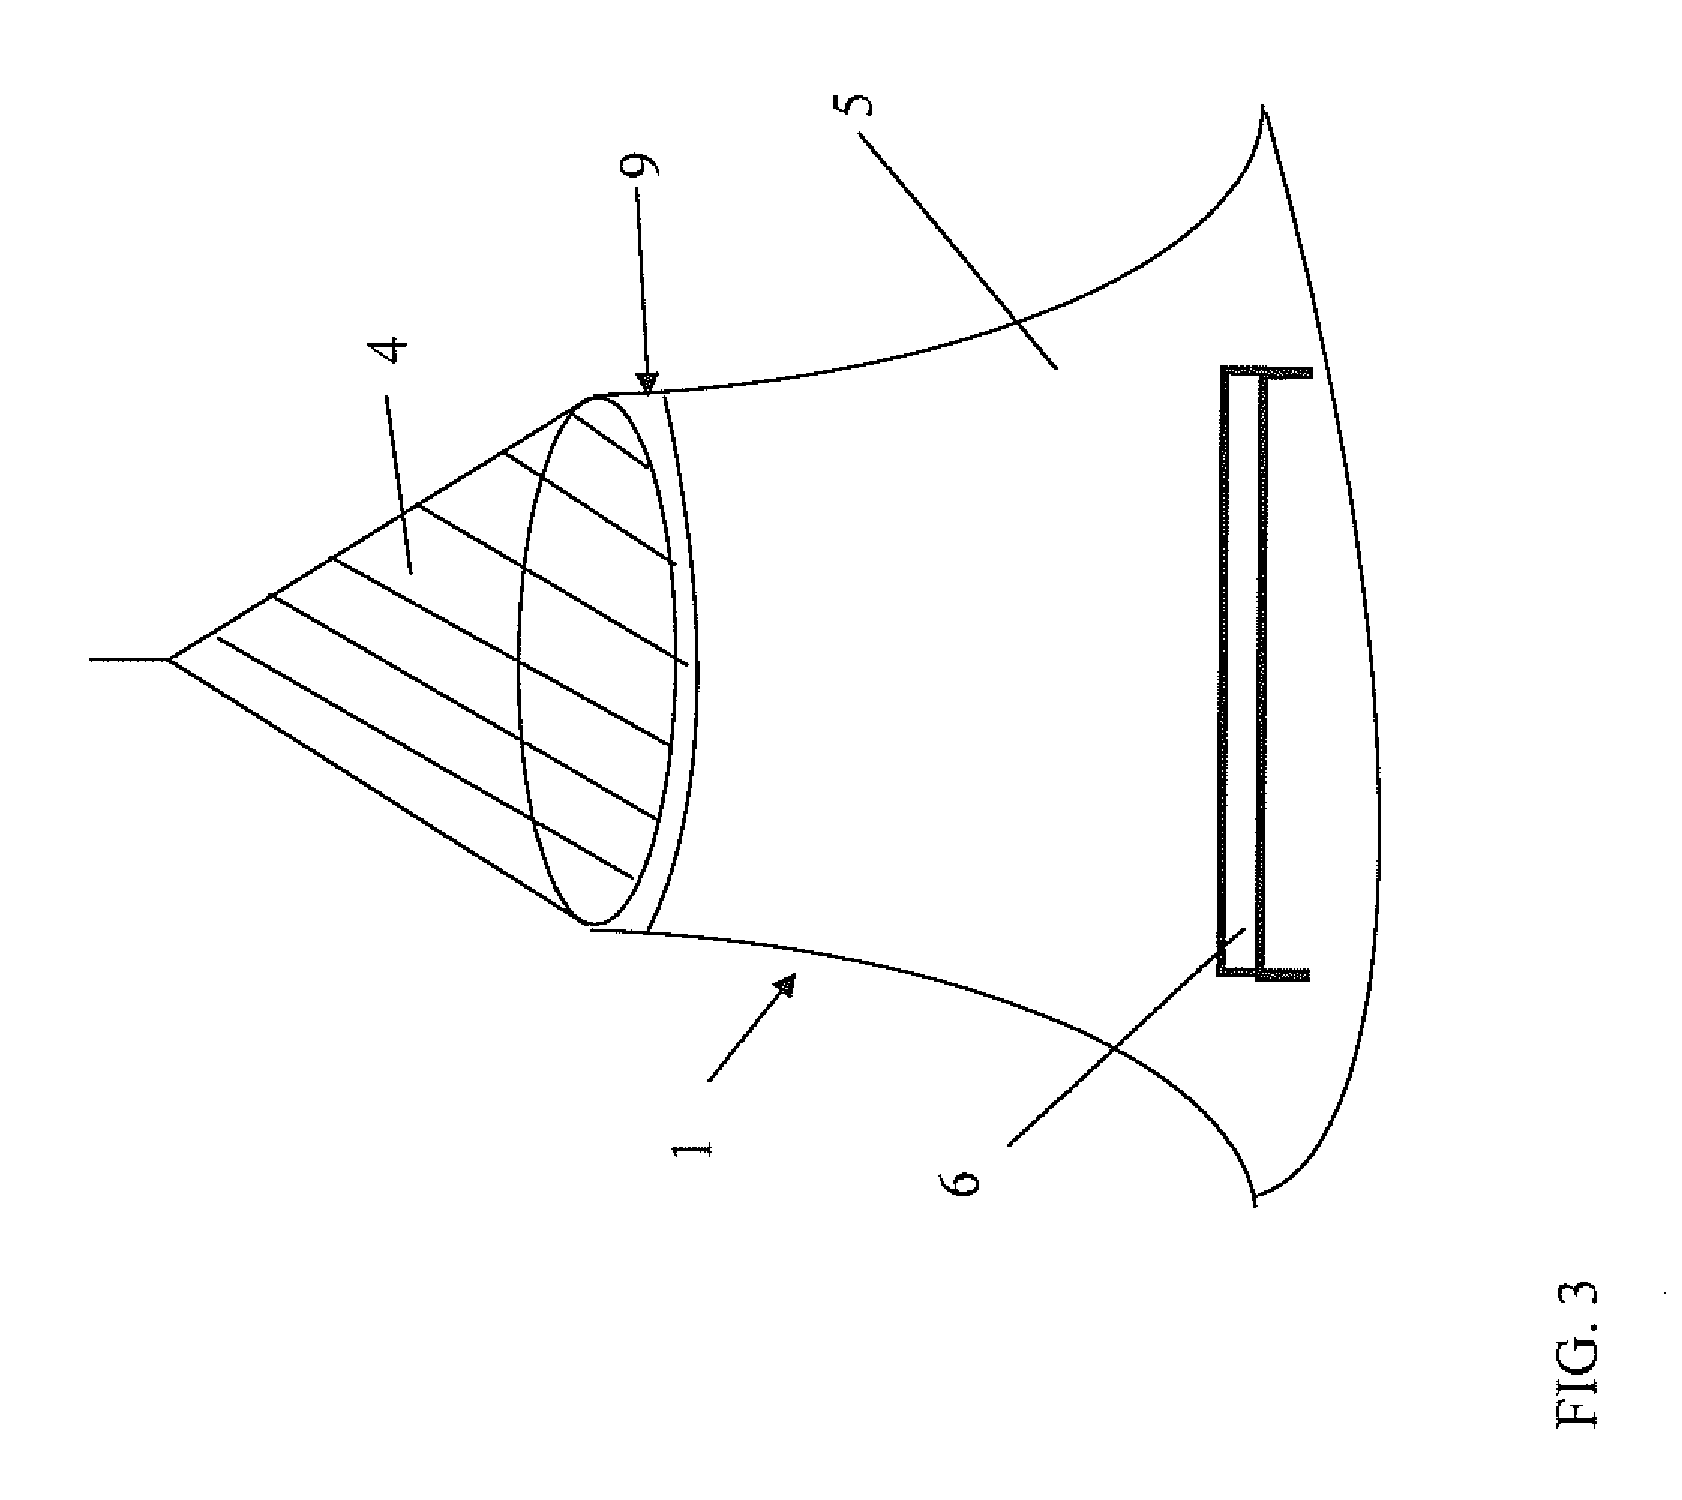 Insecticidal Polymer Matrix Comprising HDPE and LDPE